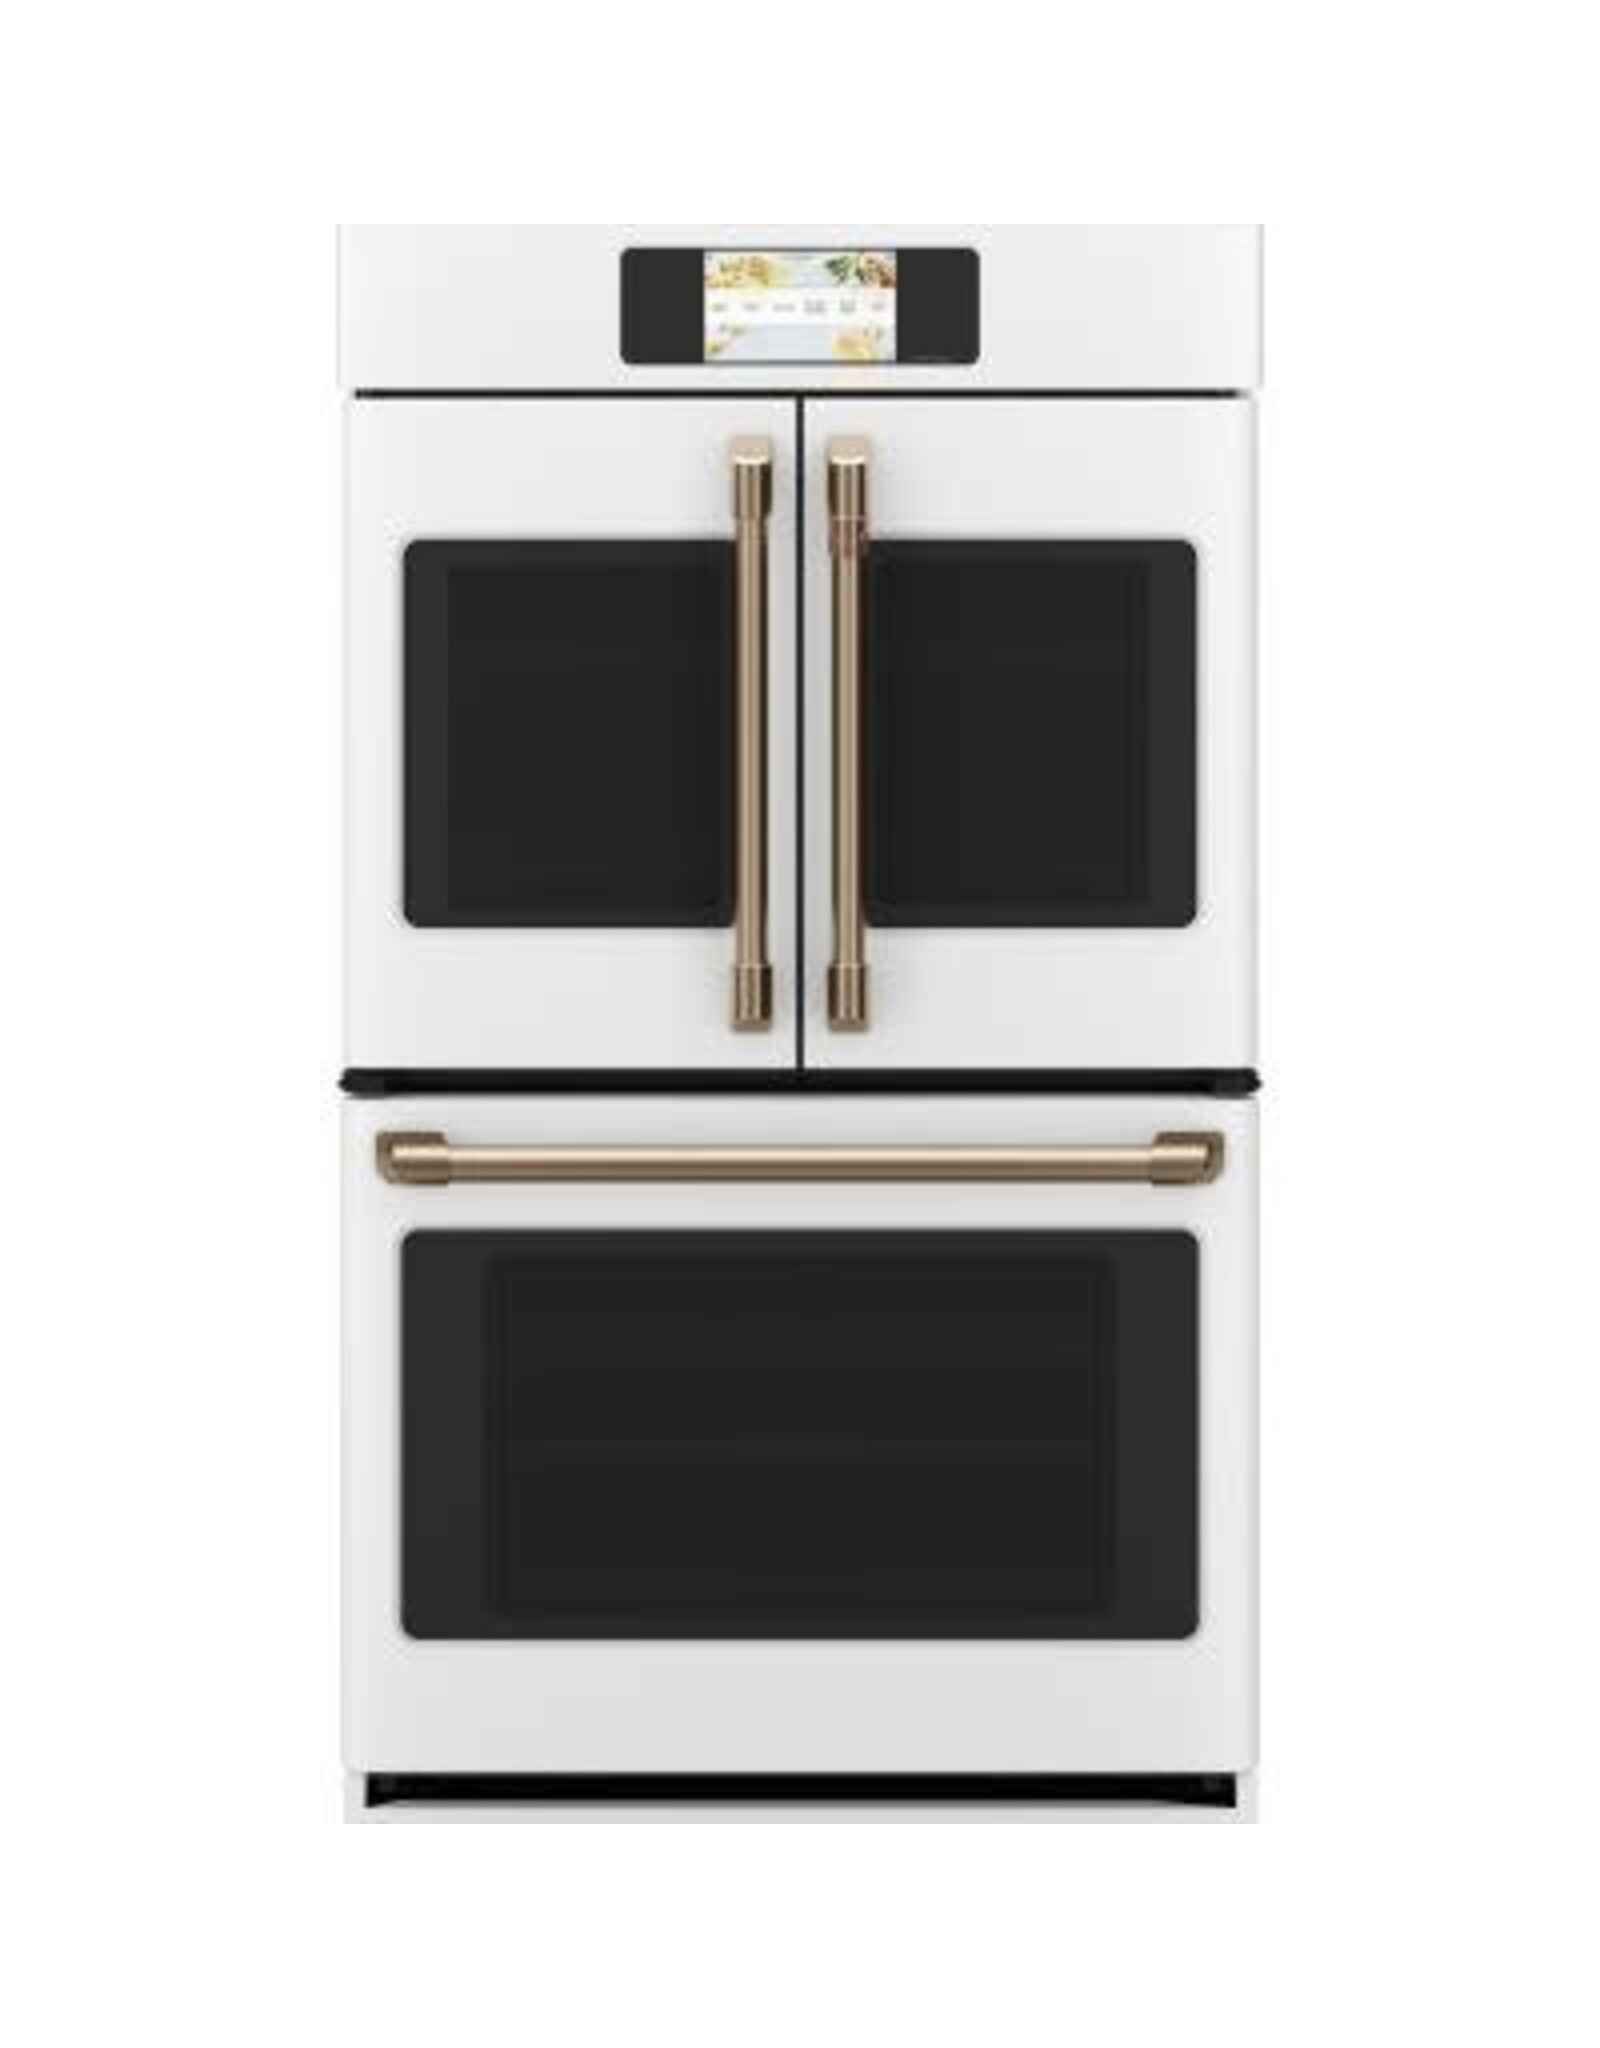 GE Cafe' CTD90FP4NW2 30 in. Smart Double Electric French-Door Wall Oven with Convection Self Cleaning in Matte White, Fingerprint Resistant